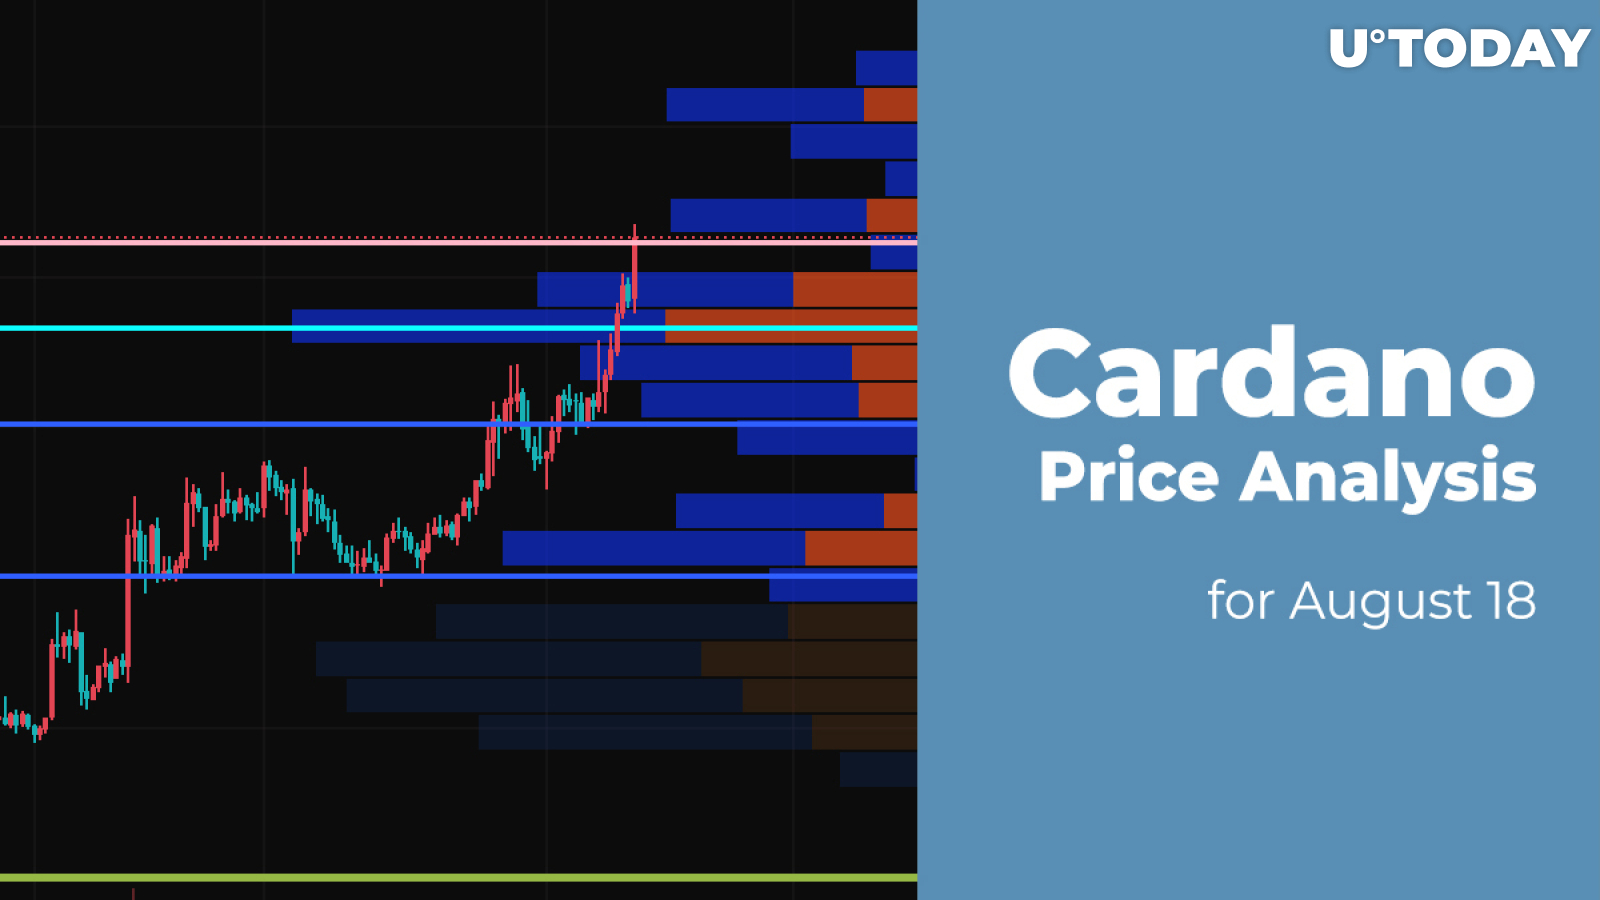 Cardano (ADA) Price Analysis for August 18